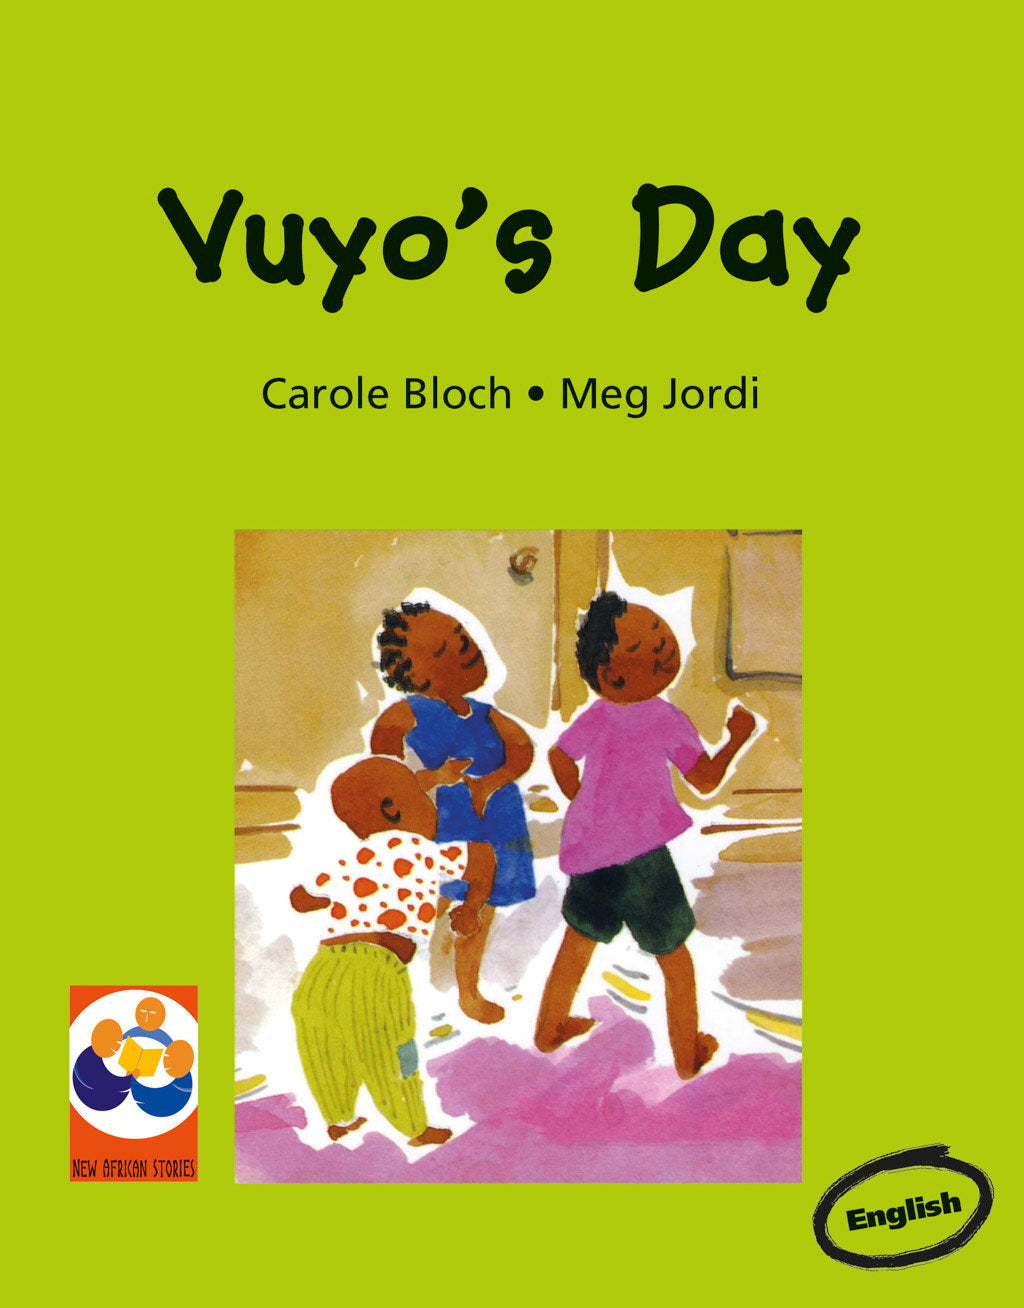 VUYO’S DAY: A story from South Africa